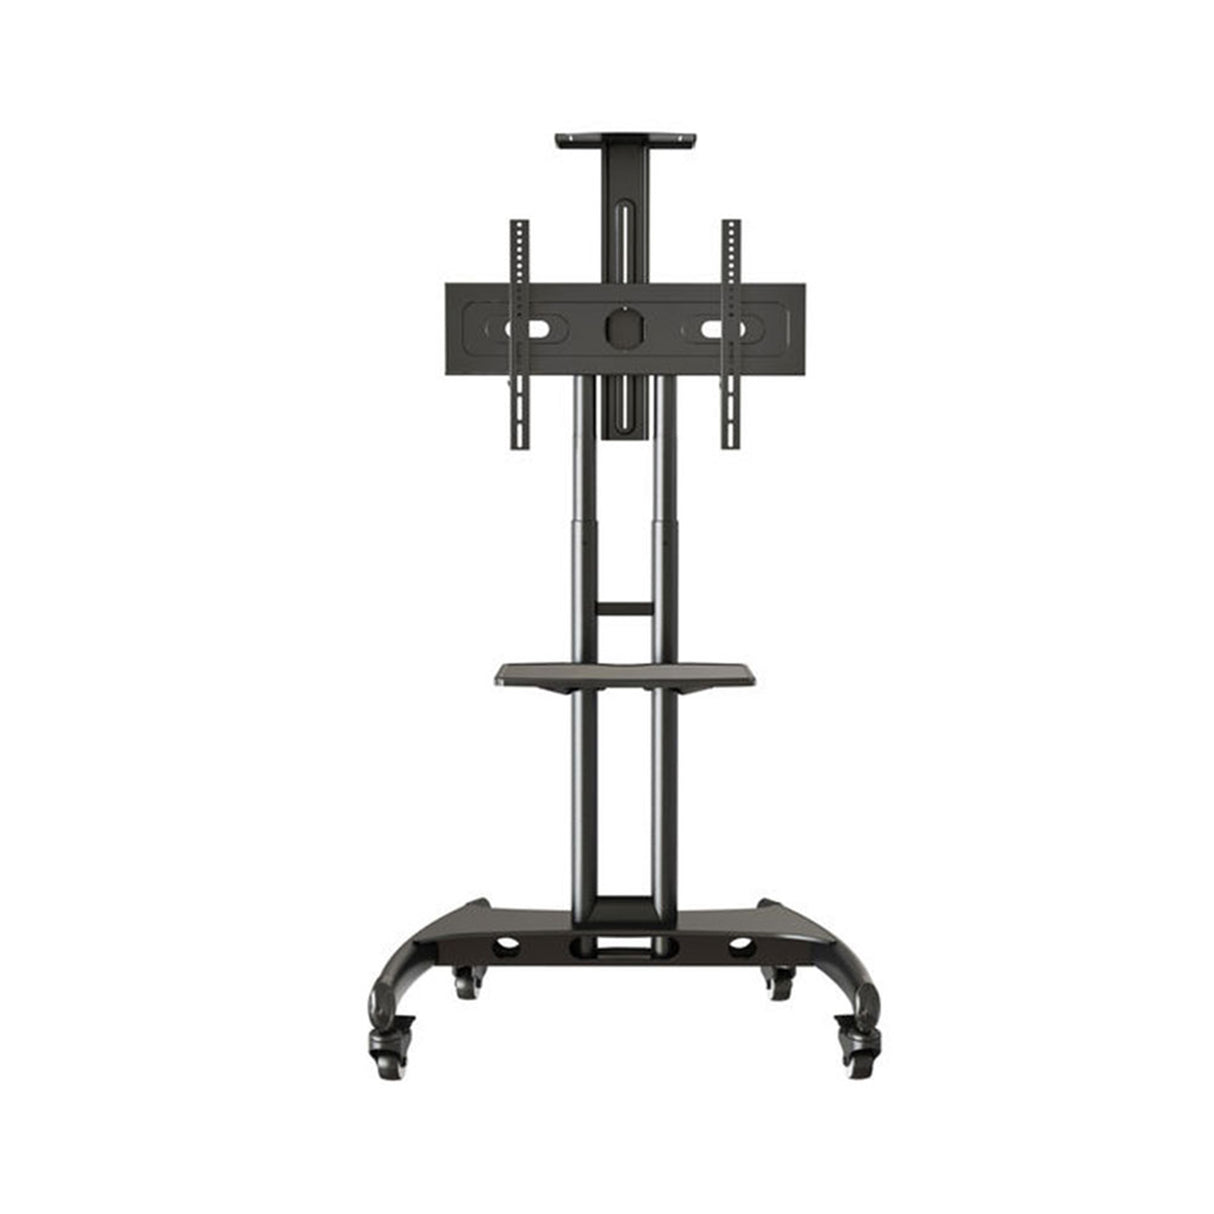 Tono OFS 55 - Height Adjustable Office TV Stand